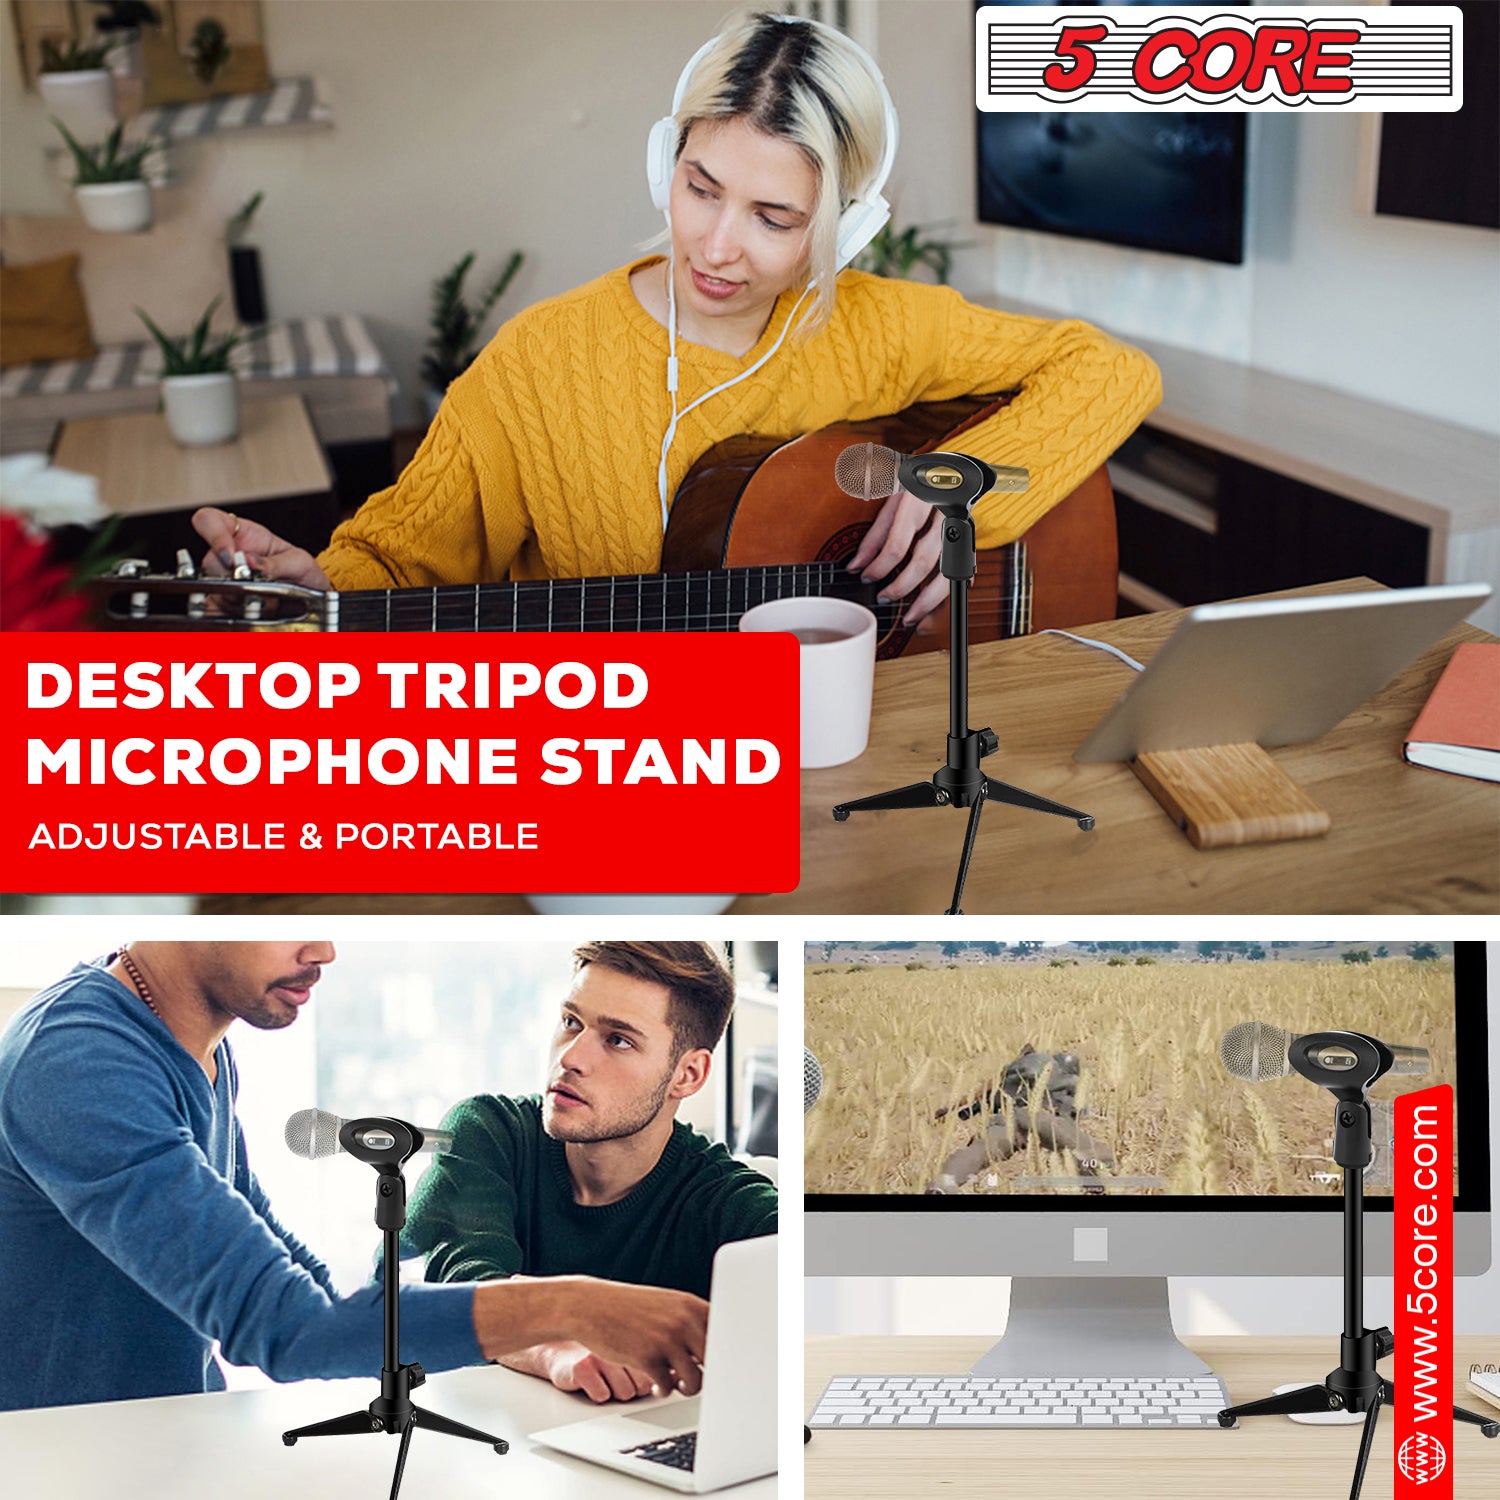 5 Core Tripod Mic Stand Desk Universal Desktop Height Adjustable Table Top Microphone Stand 1/2 Pc